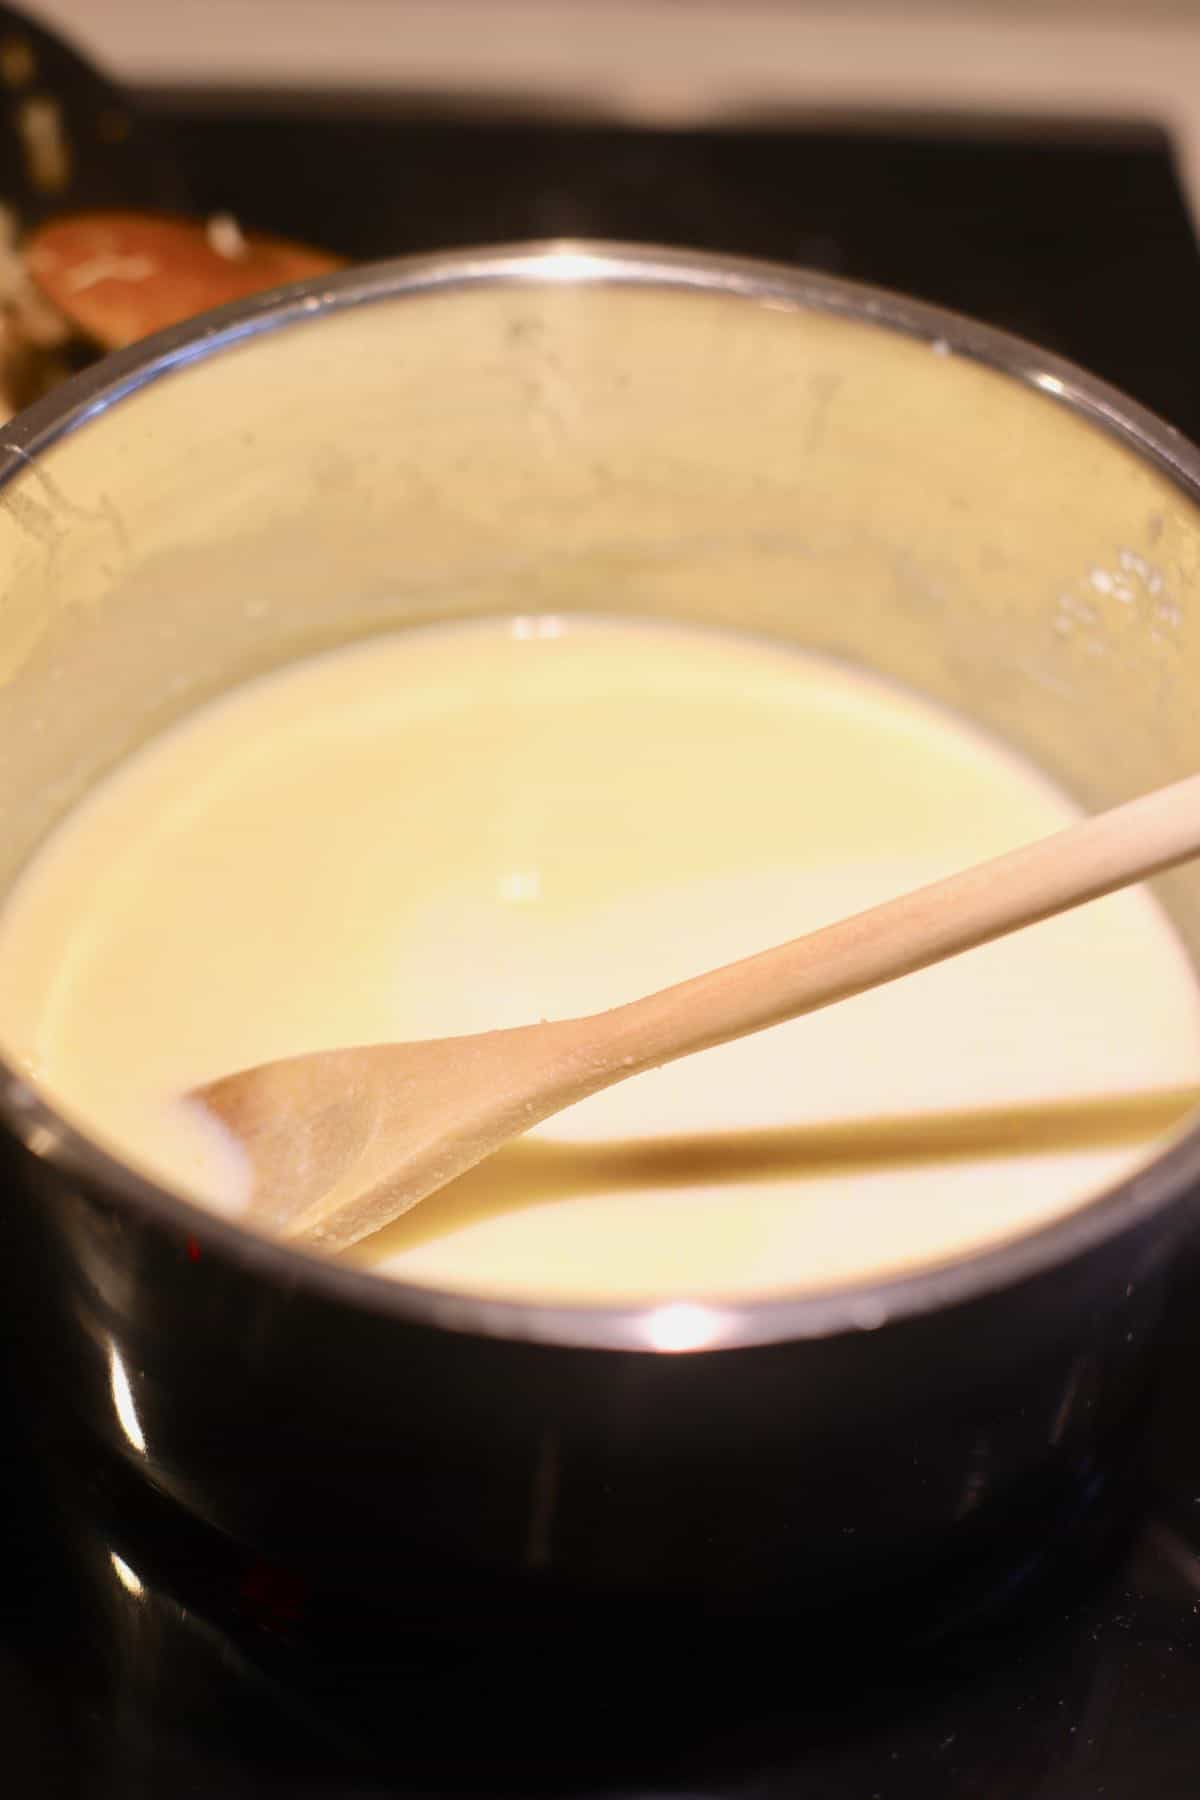 Mornay sauce in a saucepan on the stove.